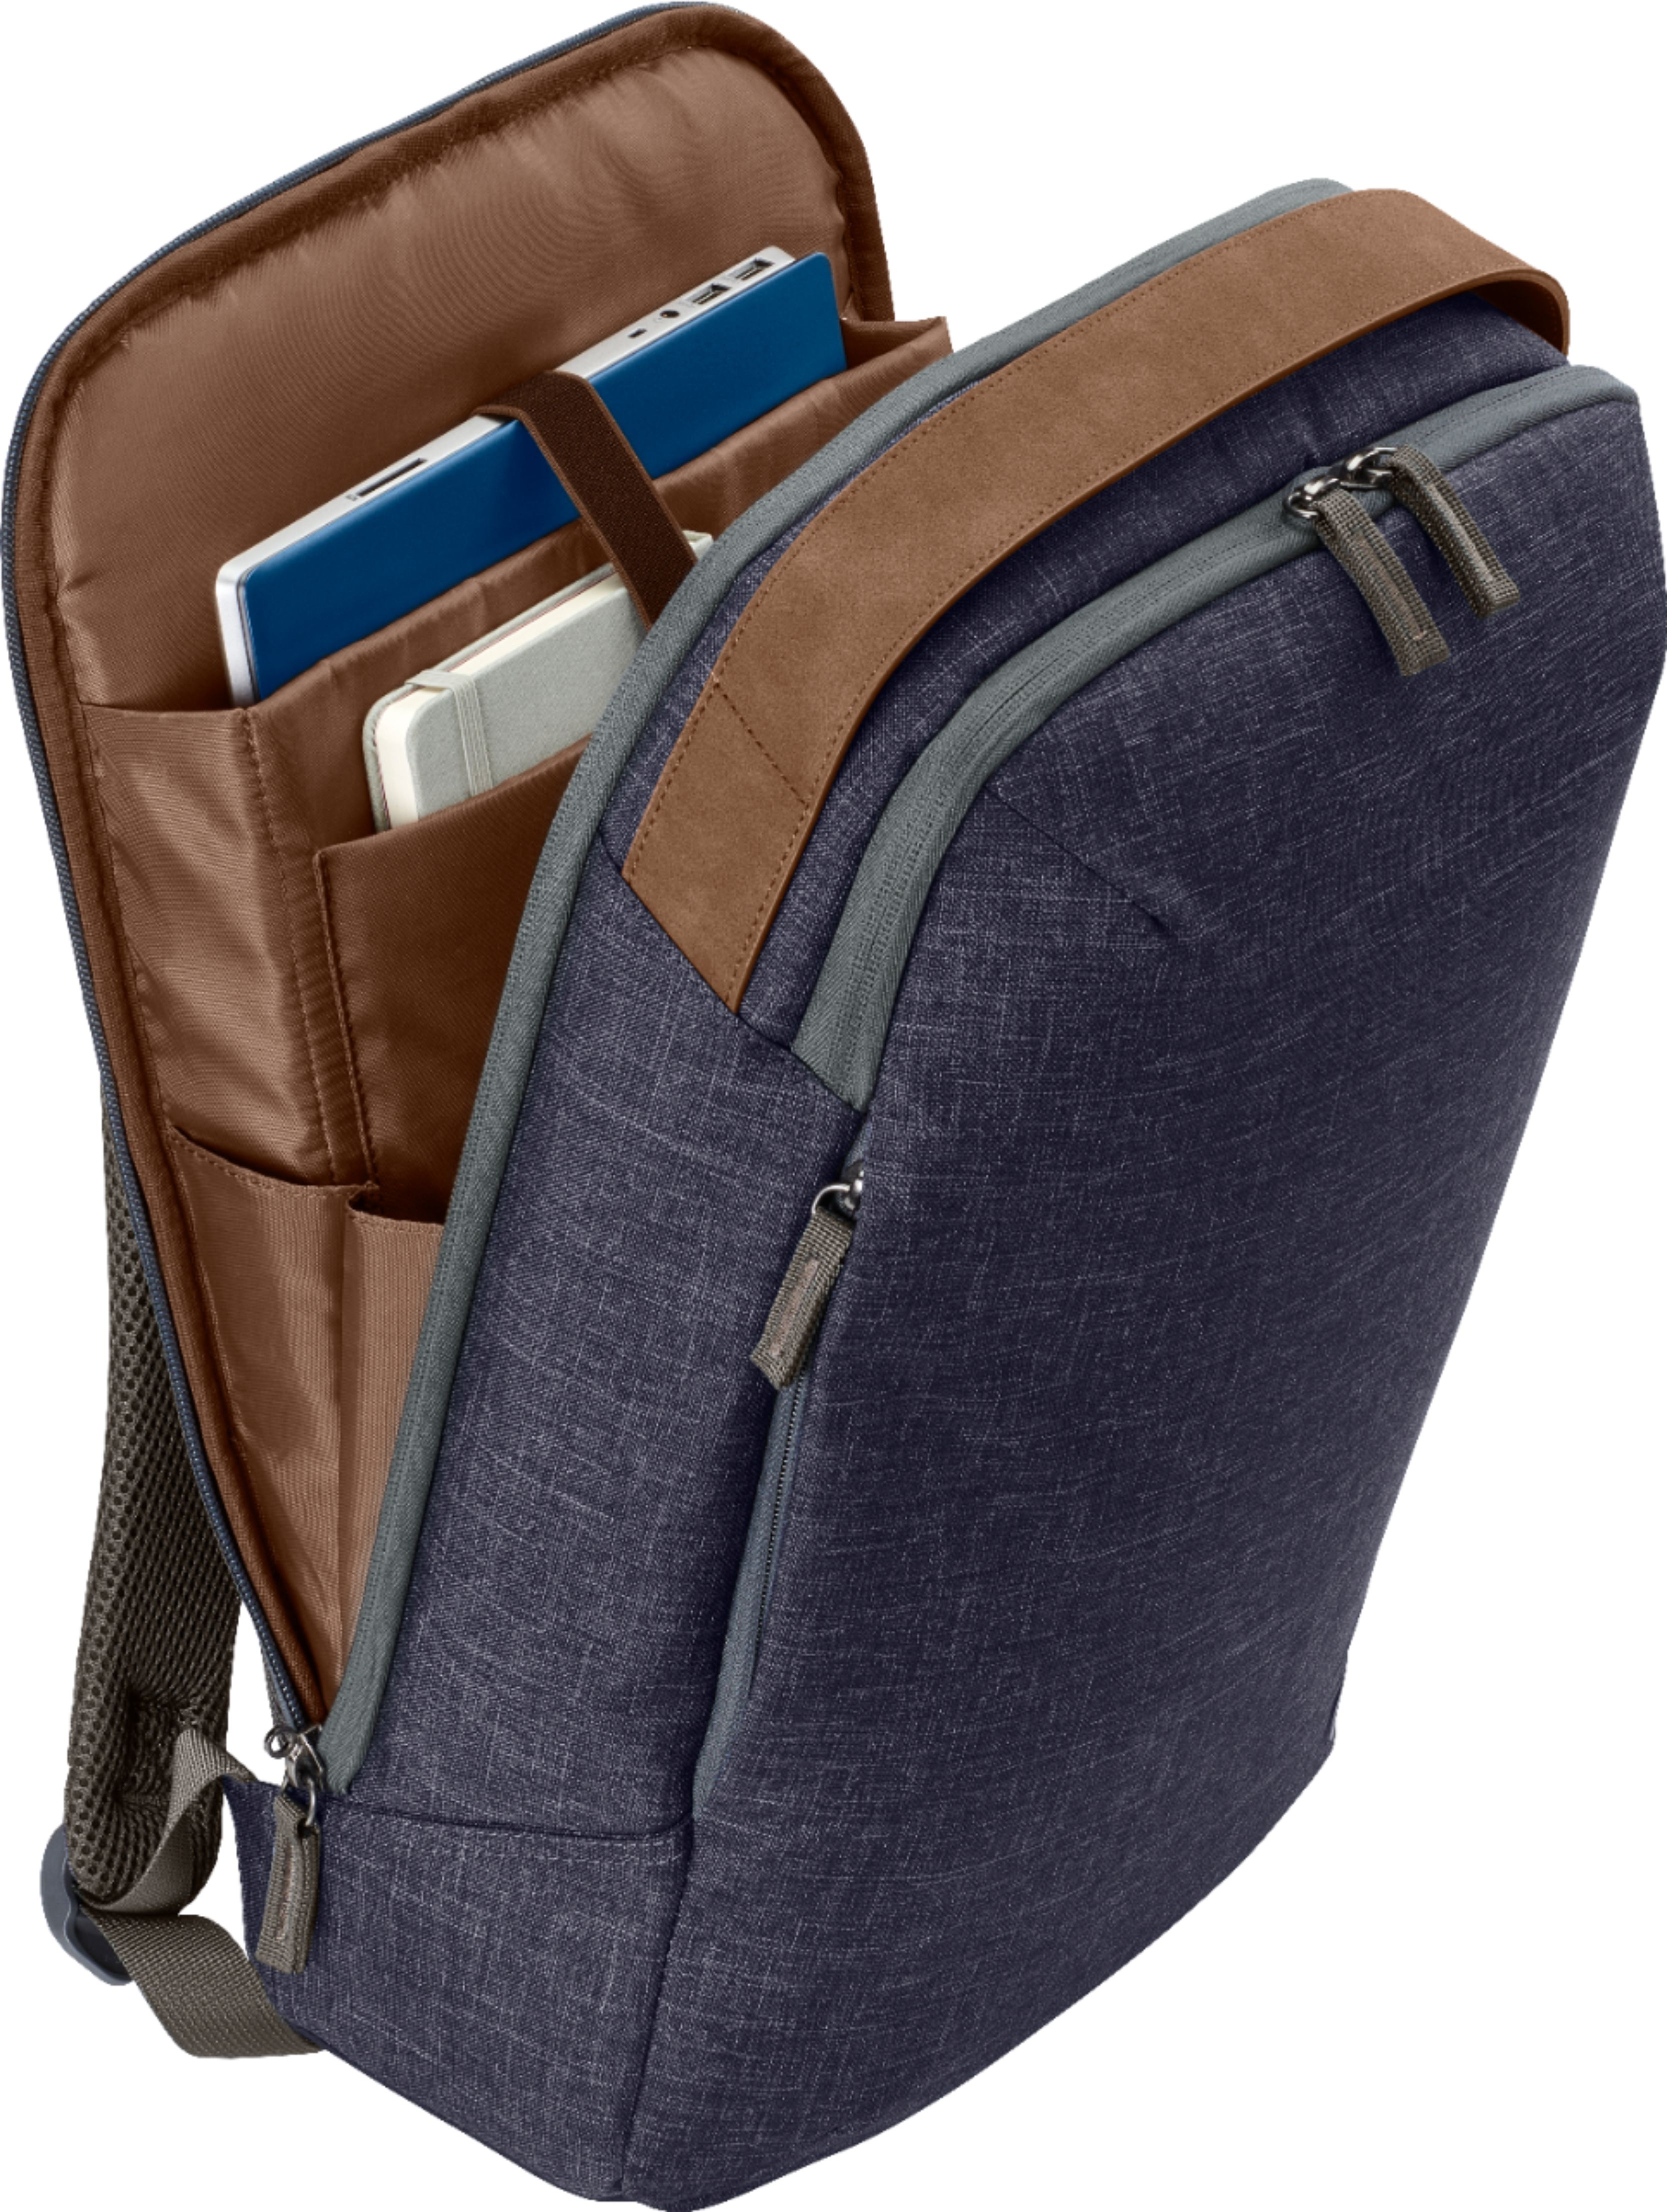 Customer Reviews: HP Renew Backpack for Laptop up to 15.6